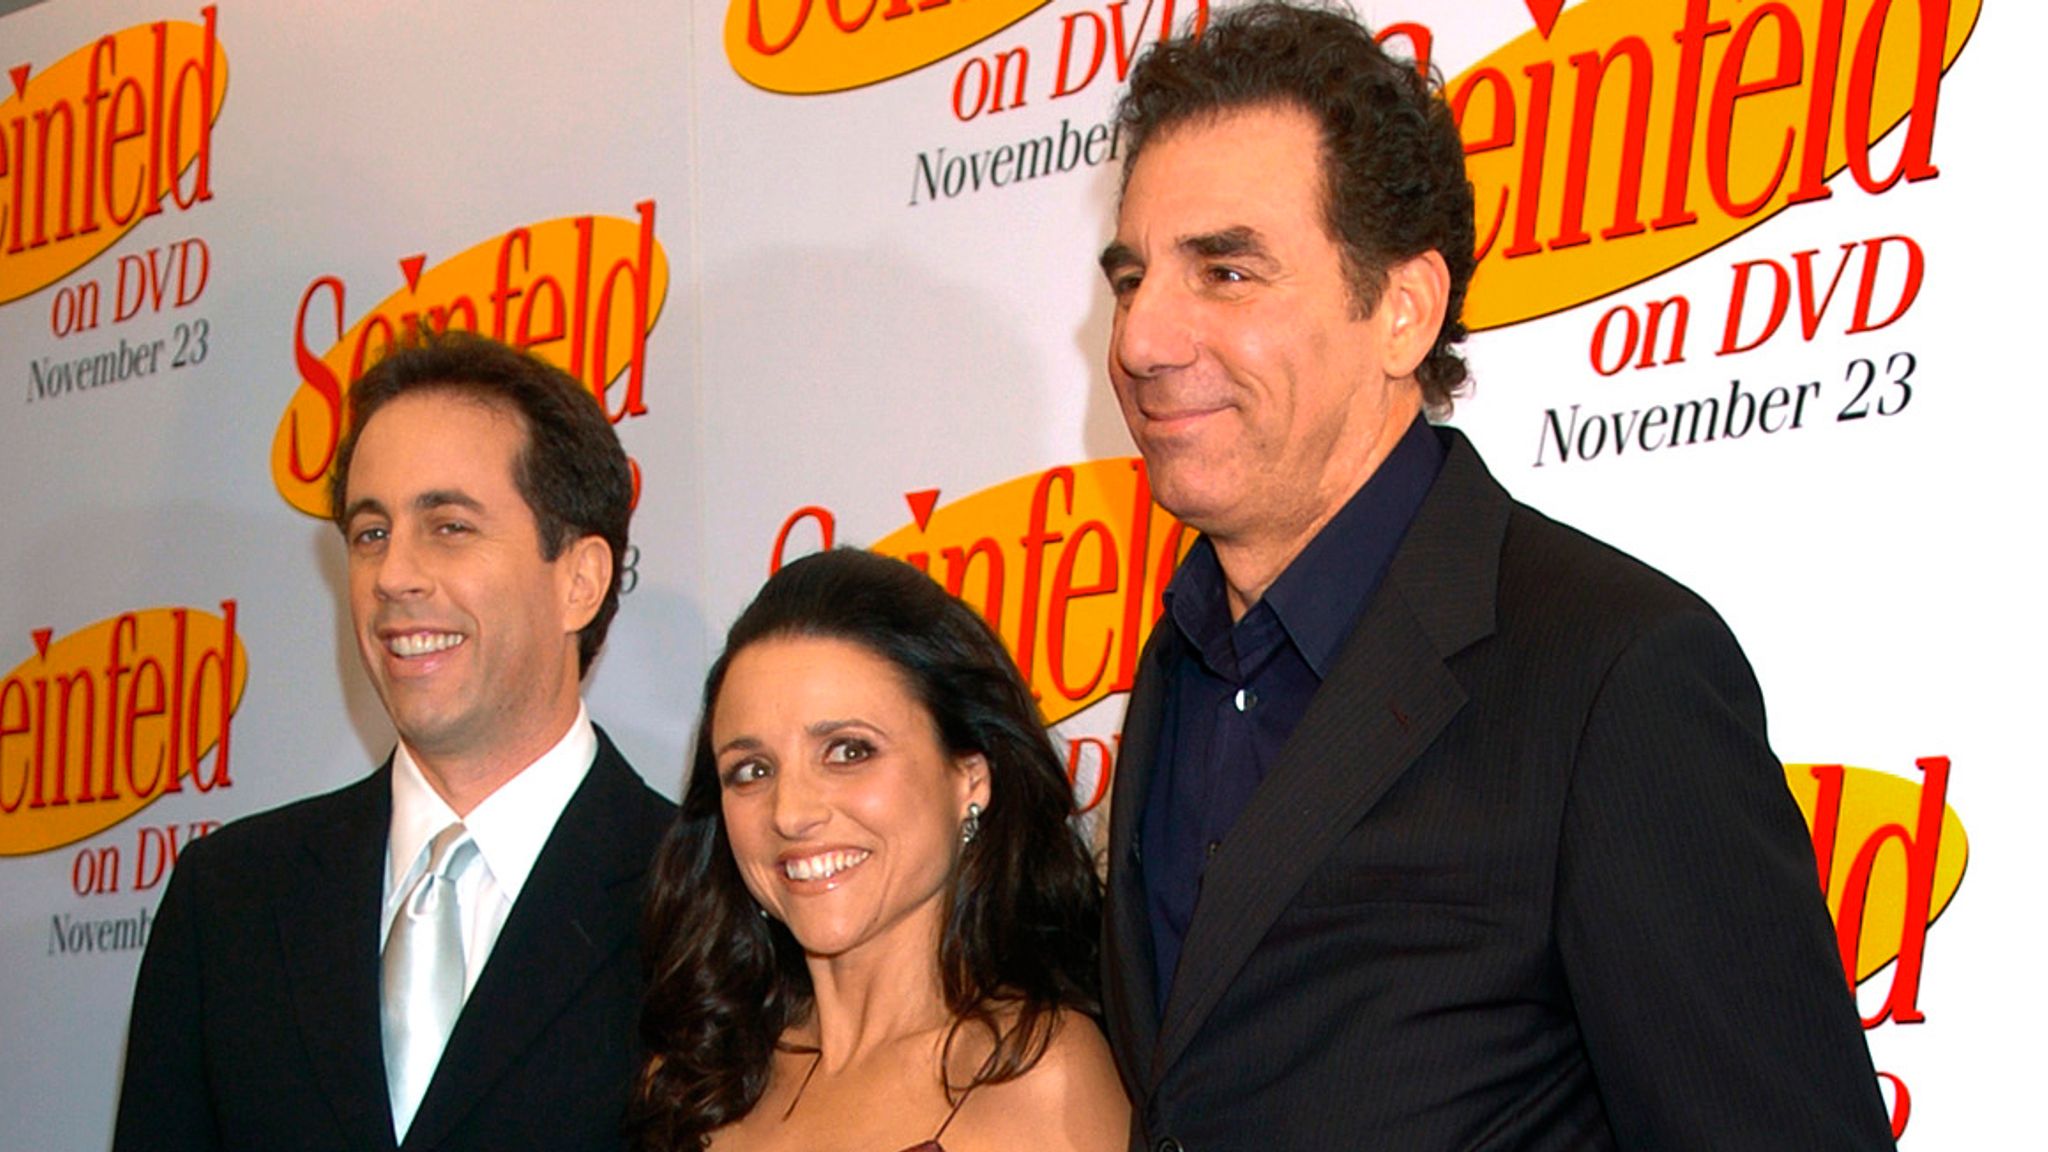 How Many Kids Does Jerry Seinfeld Have?